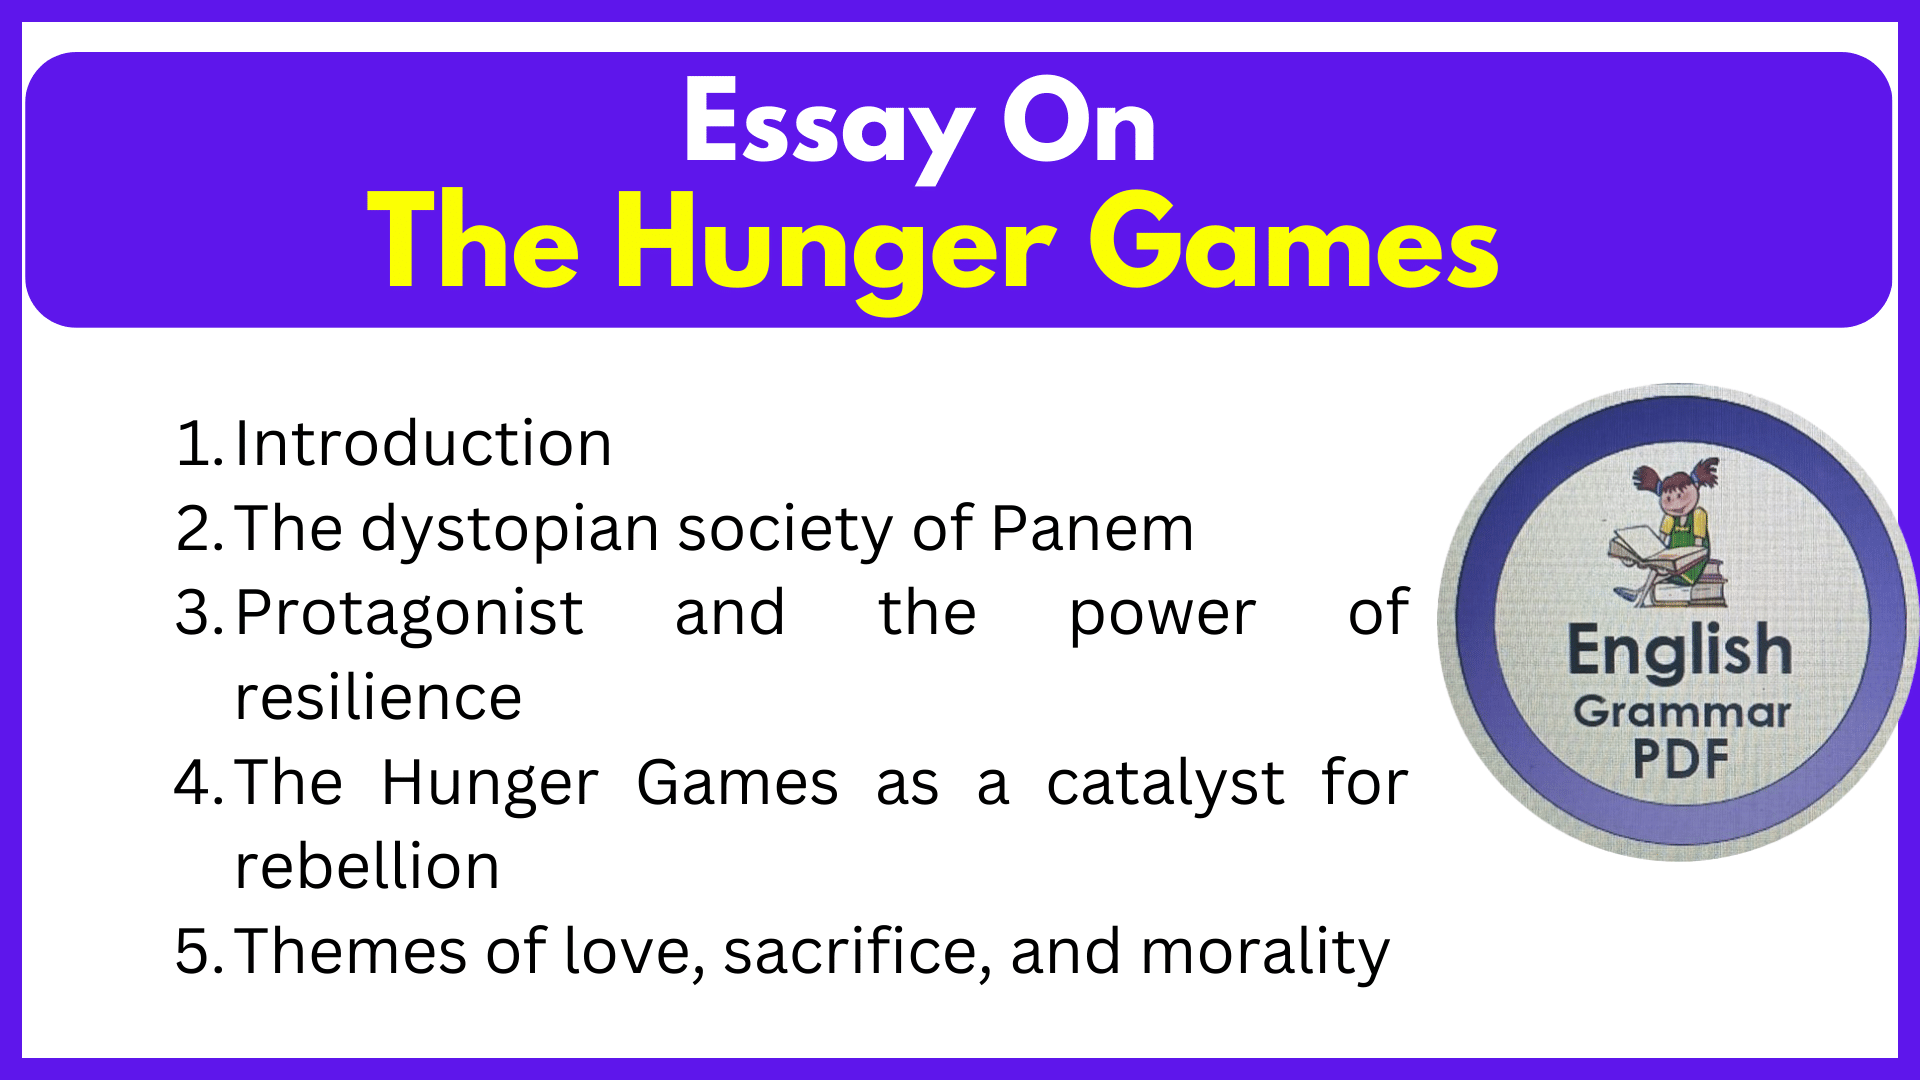 Essay On The Hunger Games